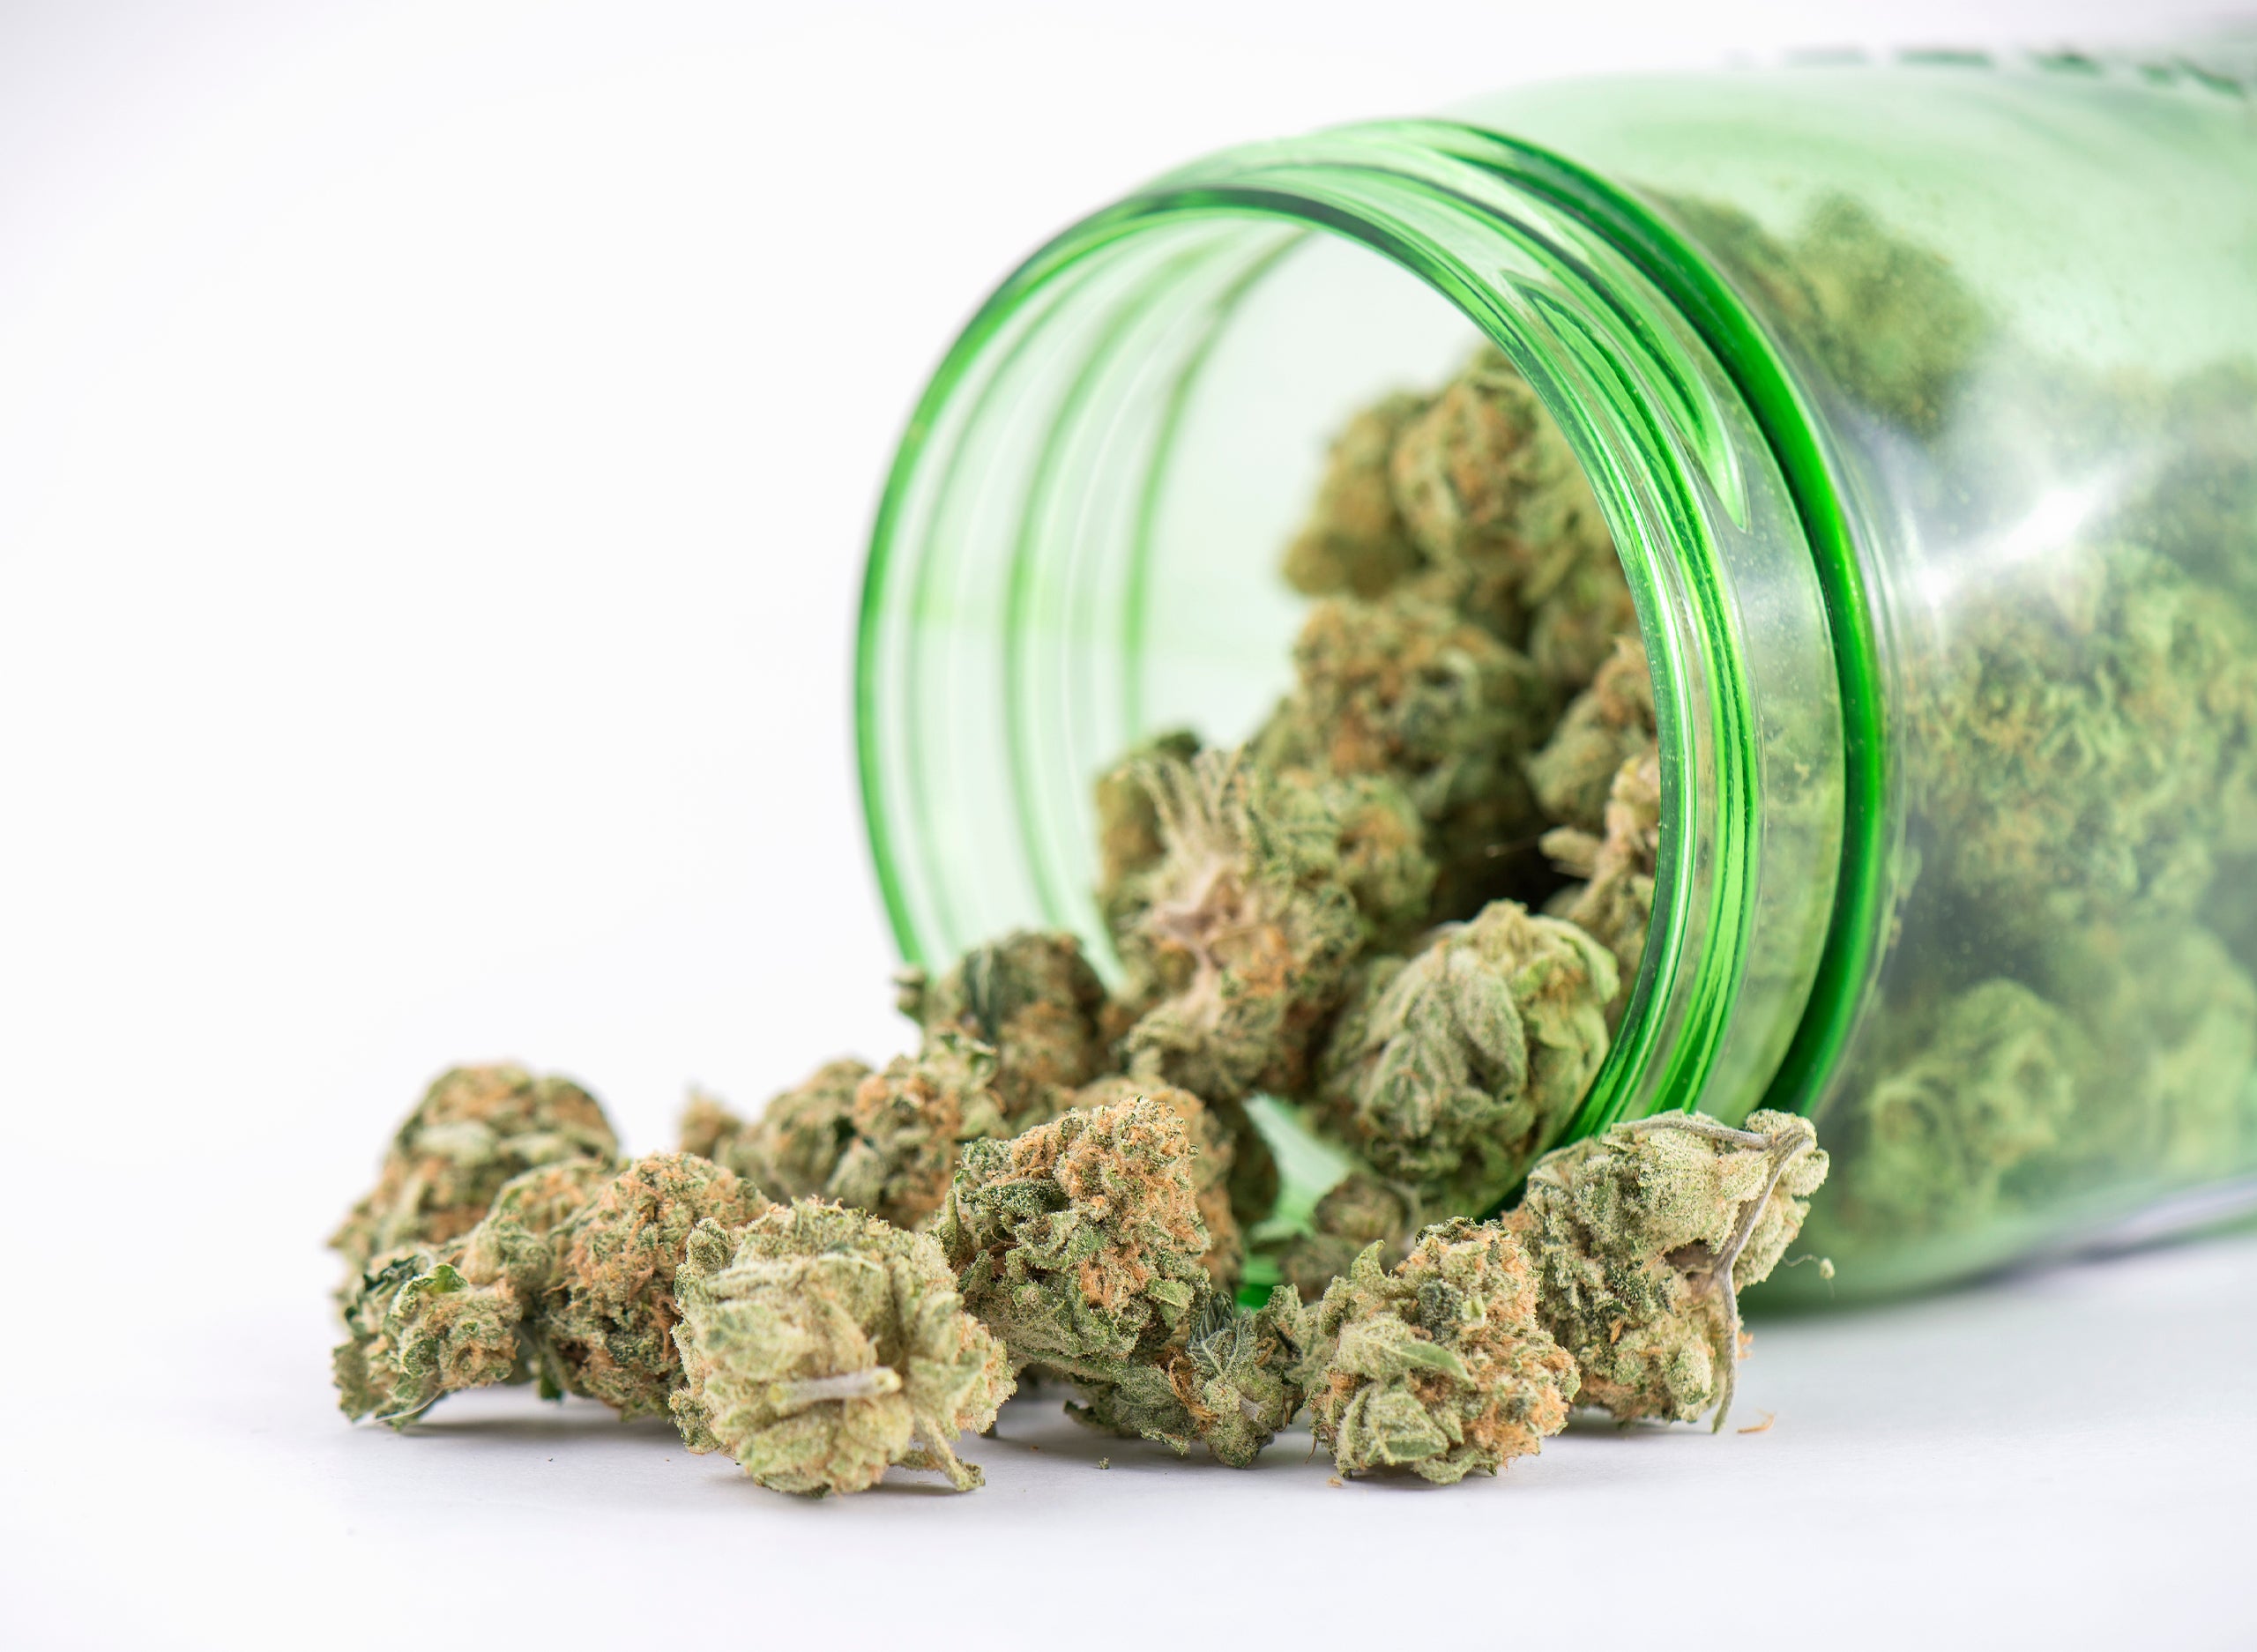 All Types of Cannabis Products: The Many Forms of Marijuana